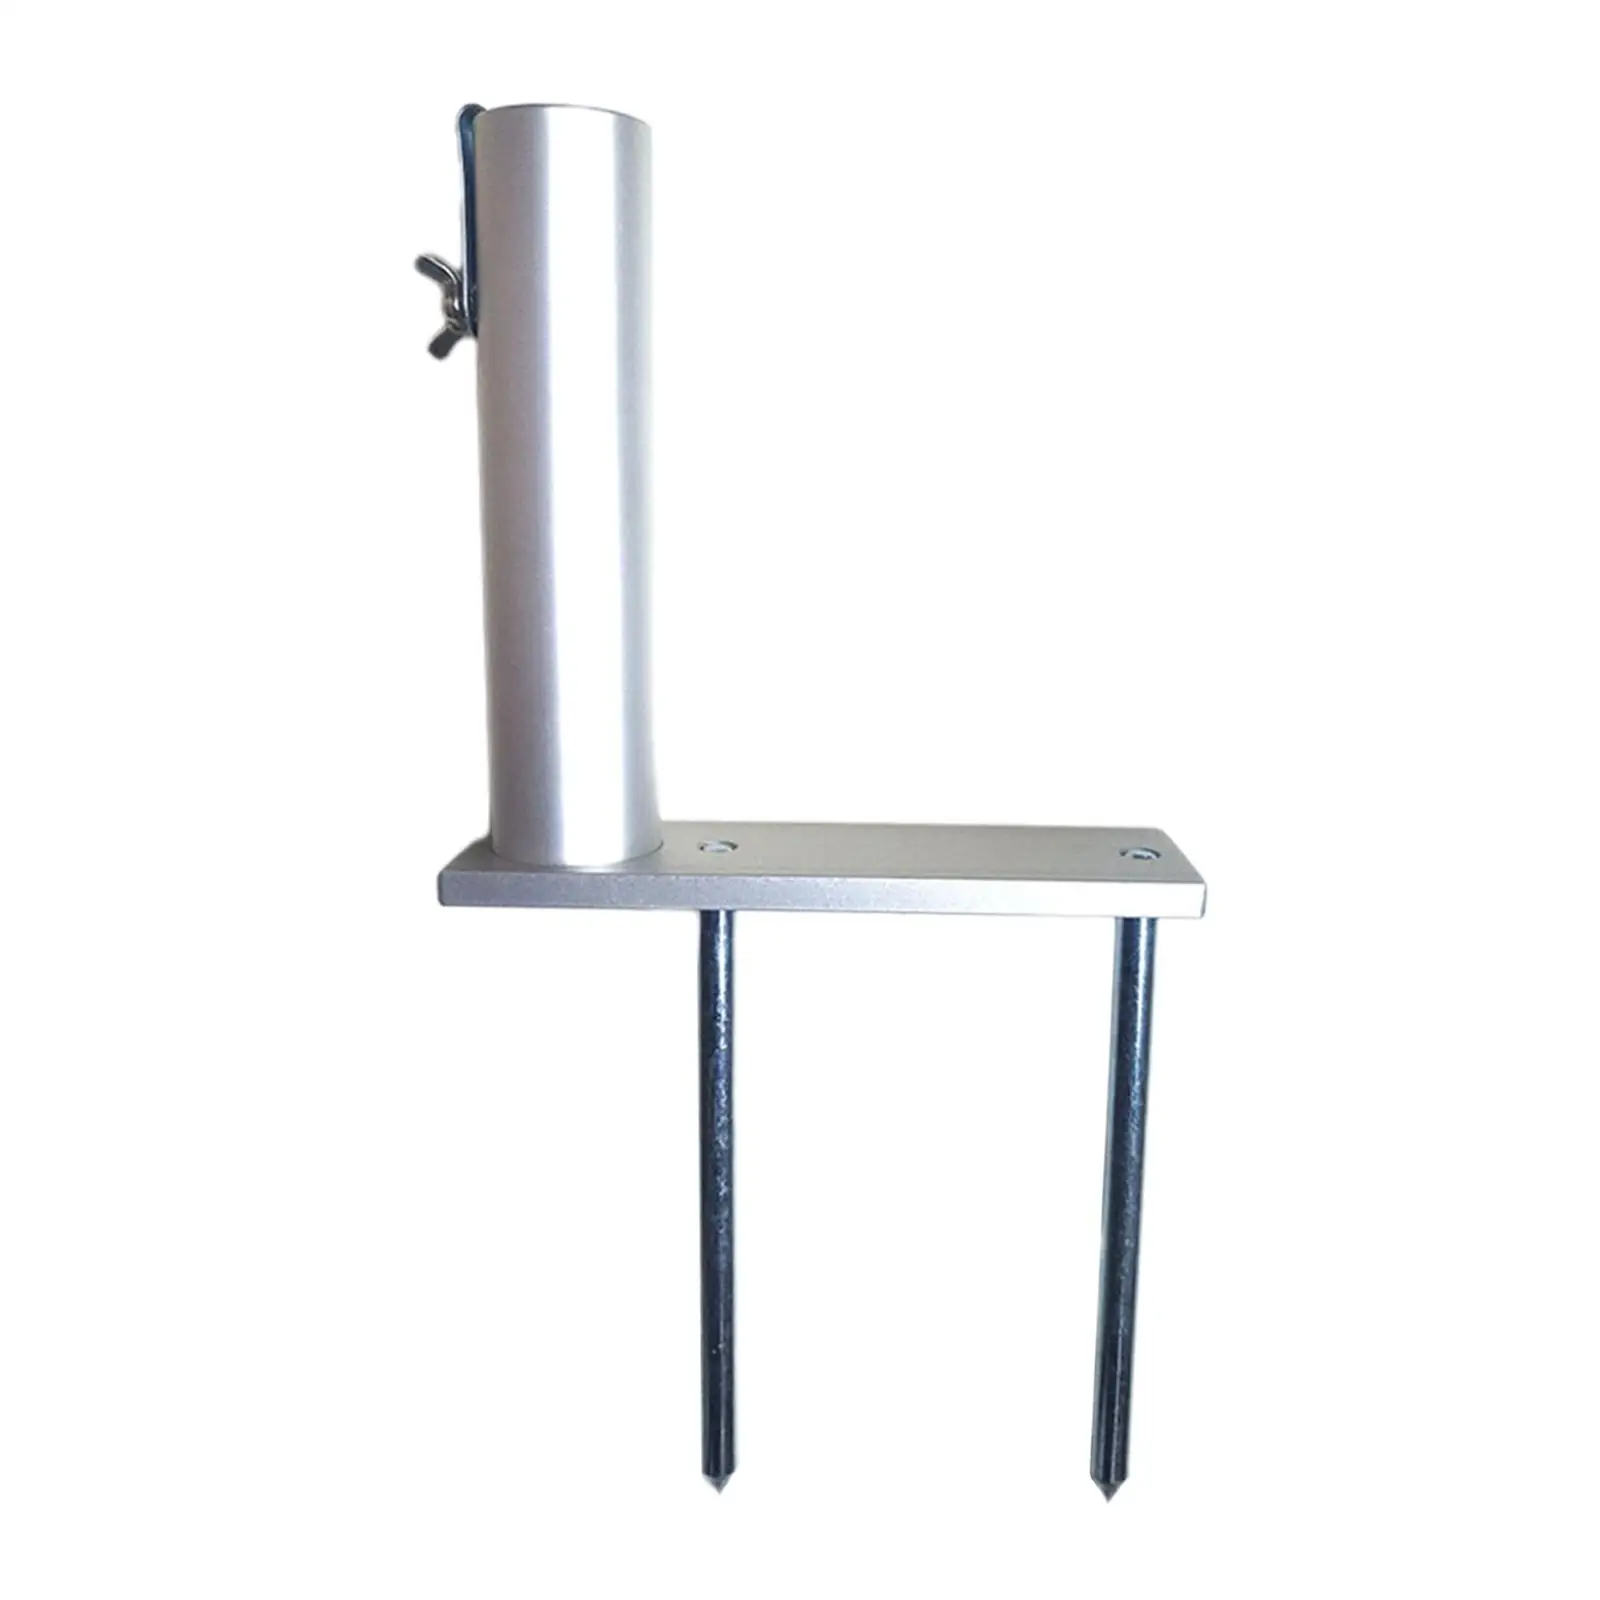 Silver Upgraded Patio Umbrella Clamp Ground Stakes for Lawns Aluminum Alloy